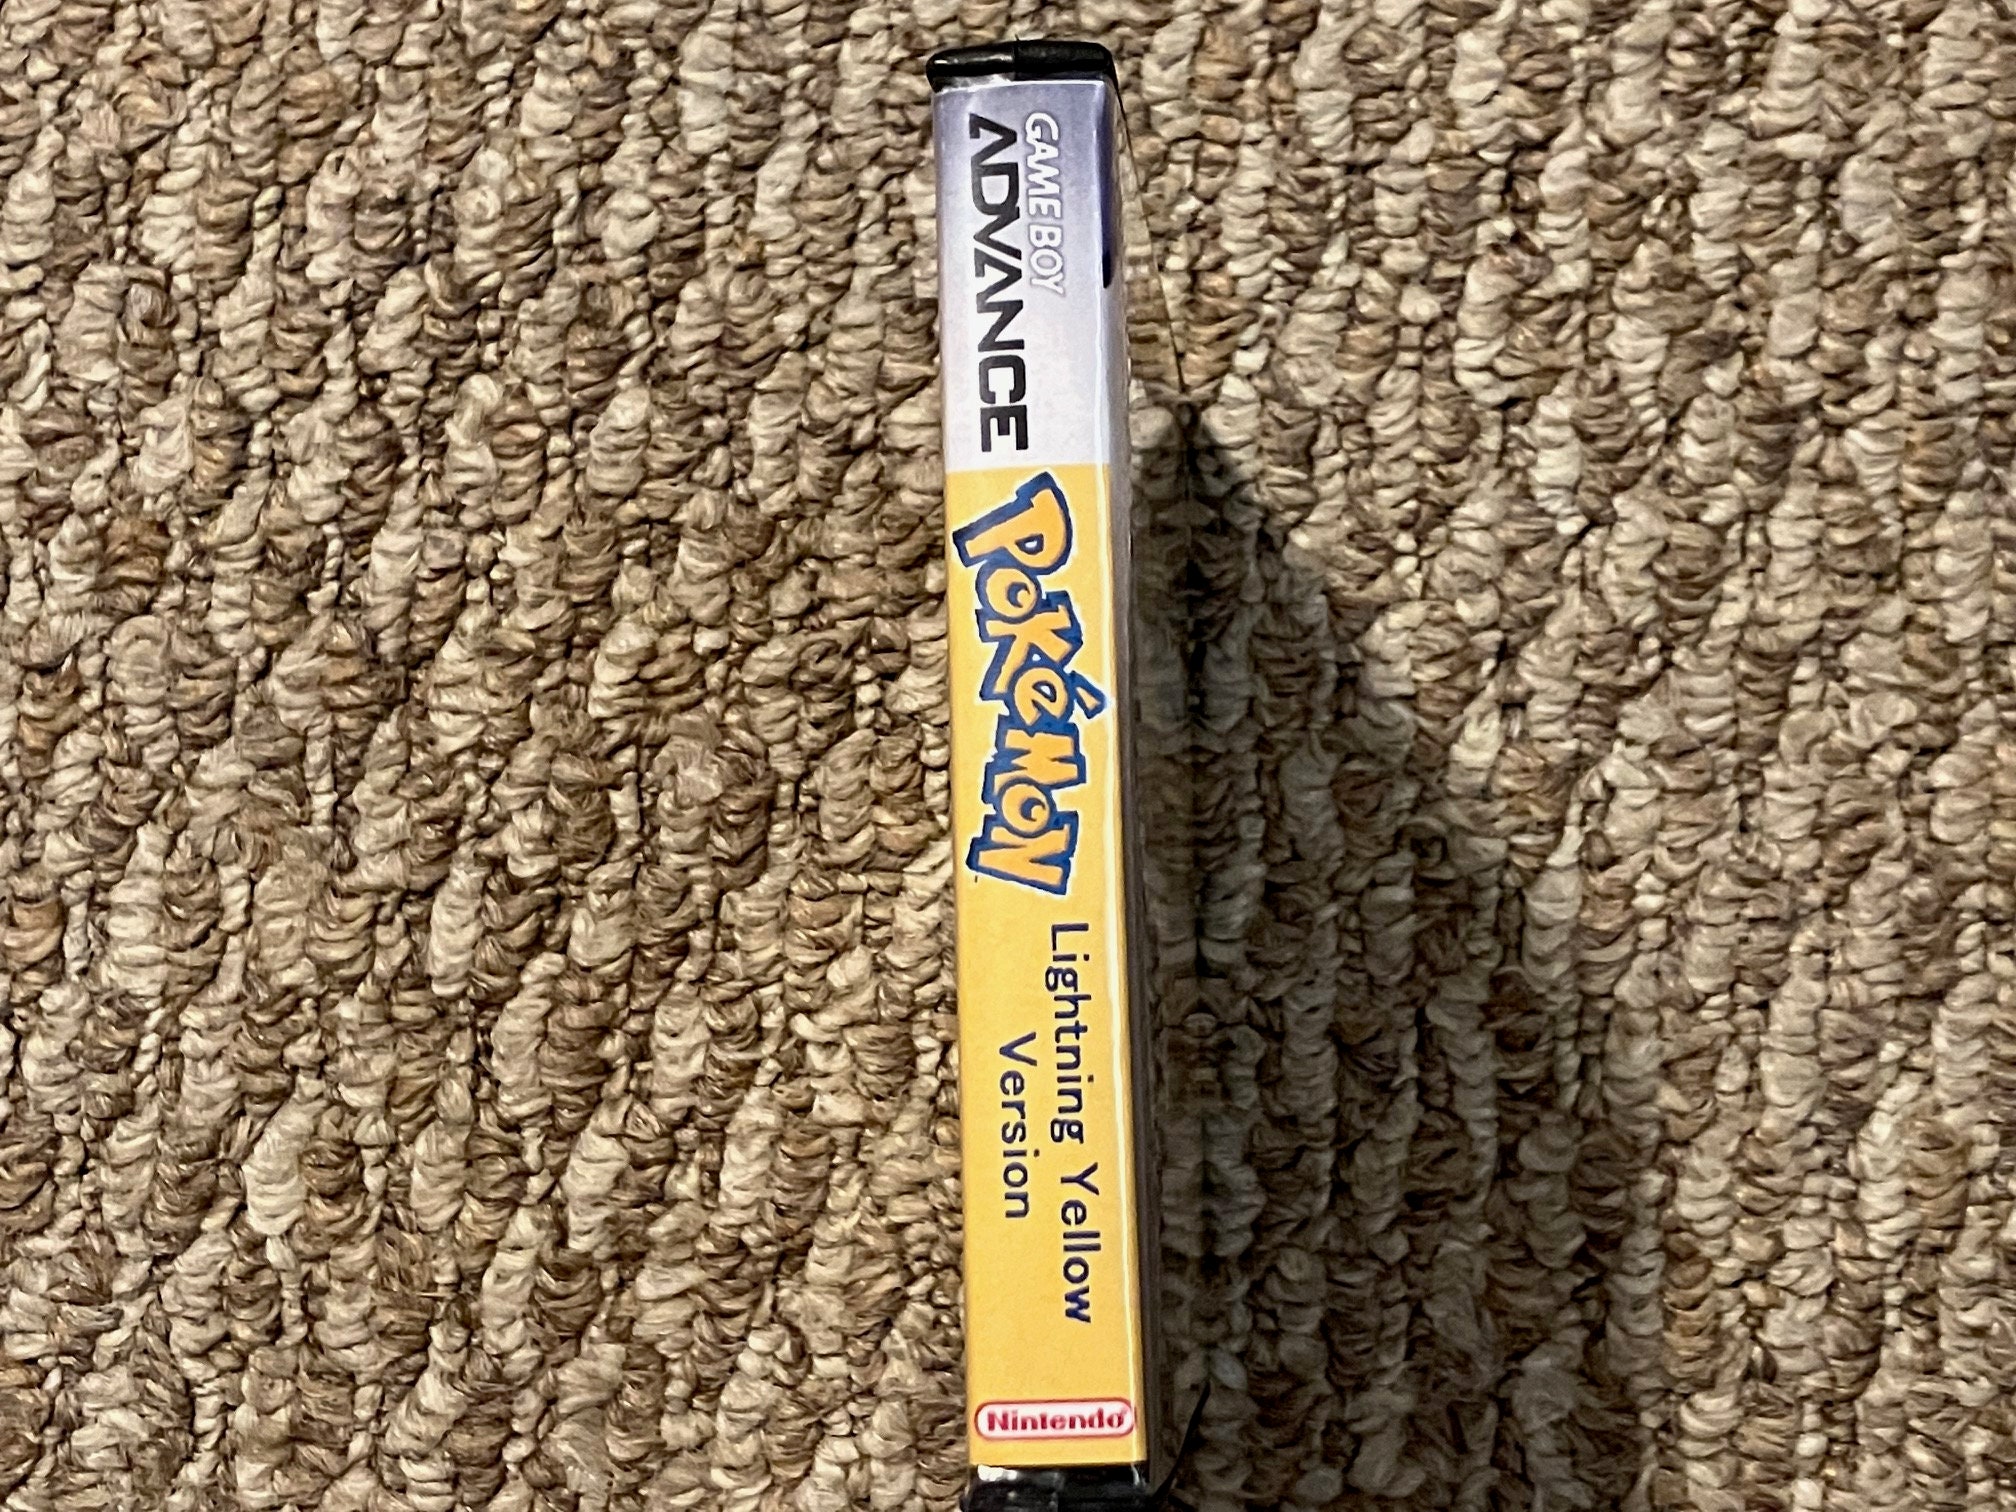 pokemon lightning yellow - Gameboy Advance Game - GBA - only Game